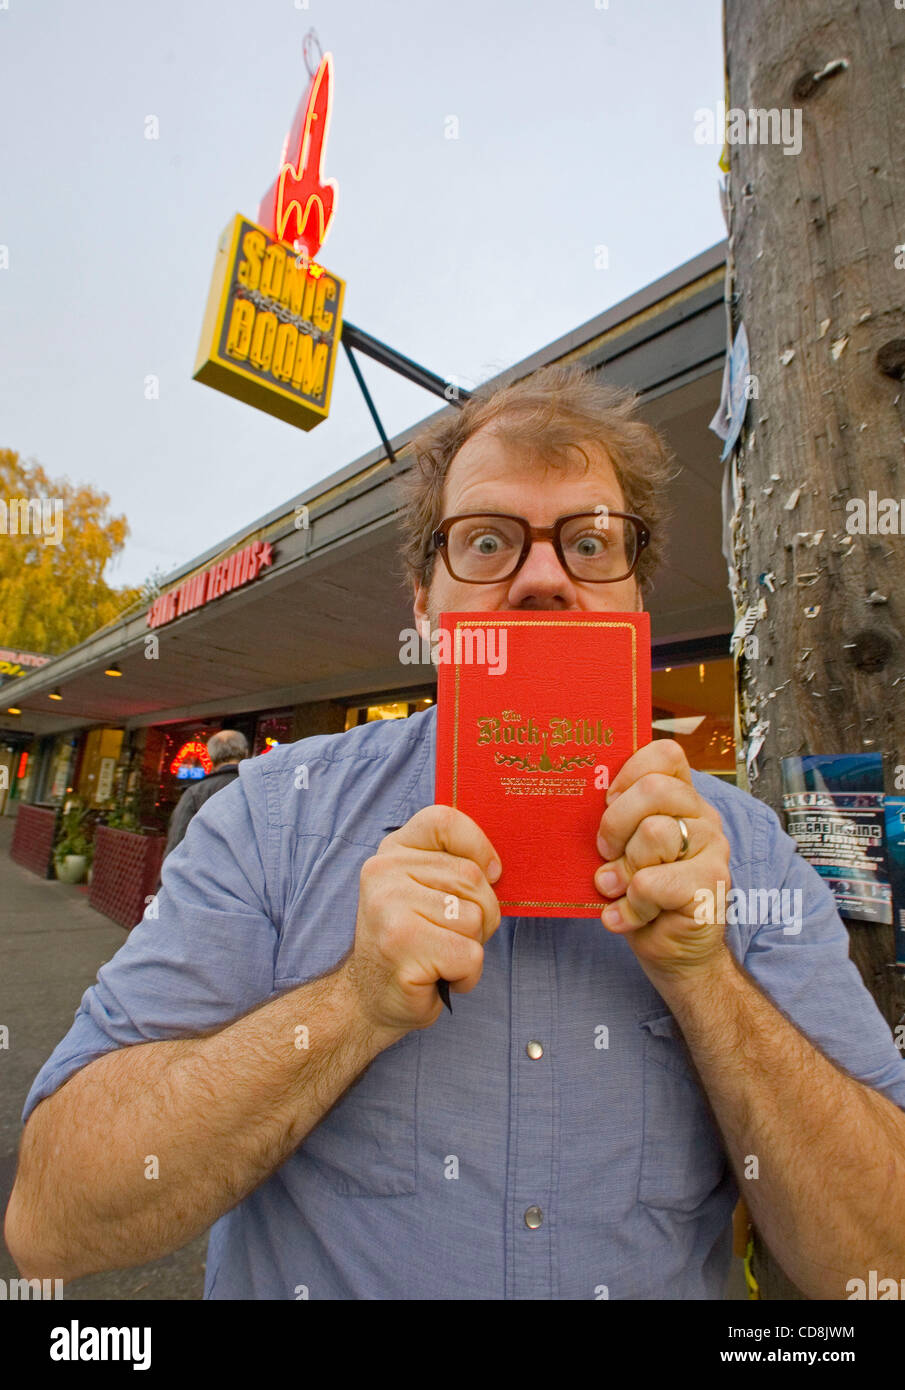 Grammy-winning producer and Chunklet publisher Henry Owings on tour with his new book 'The Rock Bible' at Sonic Boom records in Seattle,WA.  Penned by a compendium of rock and roll’s most irreverent comedic minds—chiefly Owings, Patton Oswalt, and Polyphonic Spree drummer Brian Teasley—The Rock Bibl Stock Photo